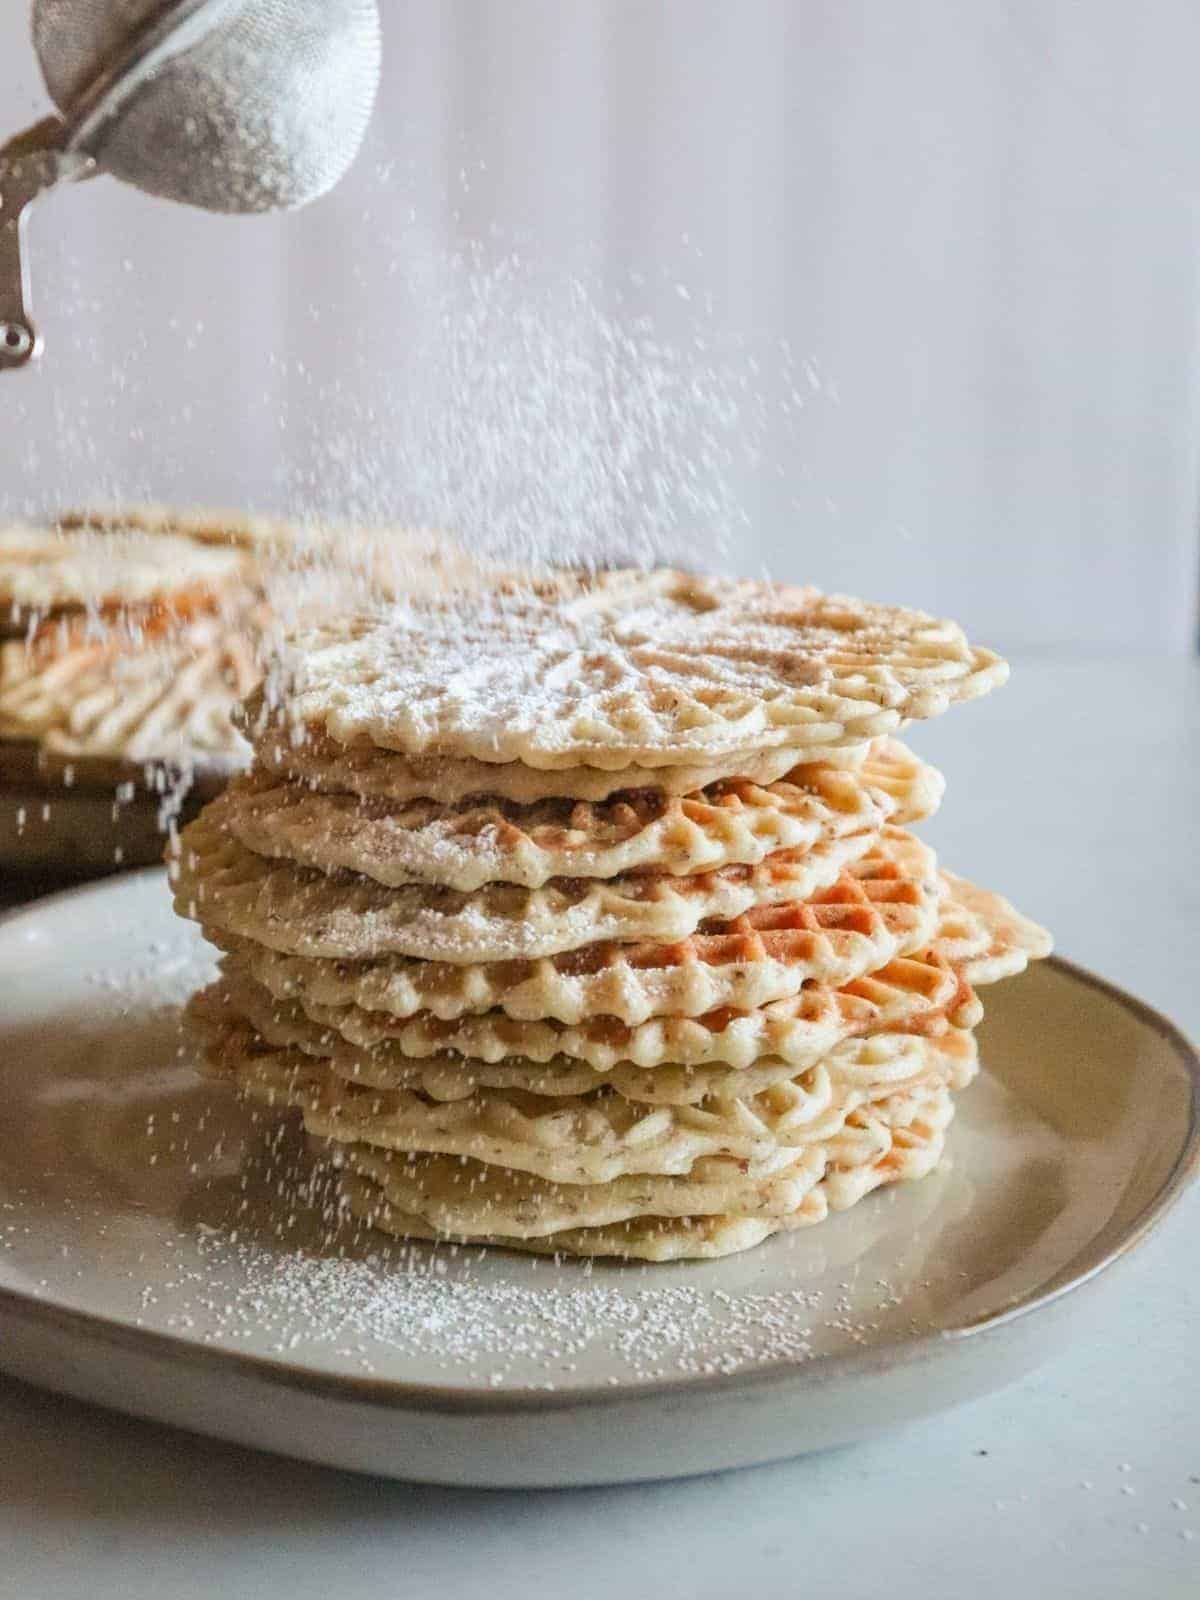 Stack of pizzelles on plate with powered sugar sprinkling on top